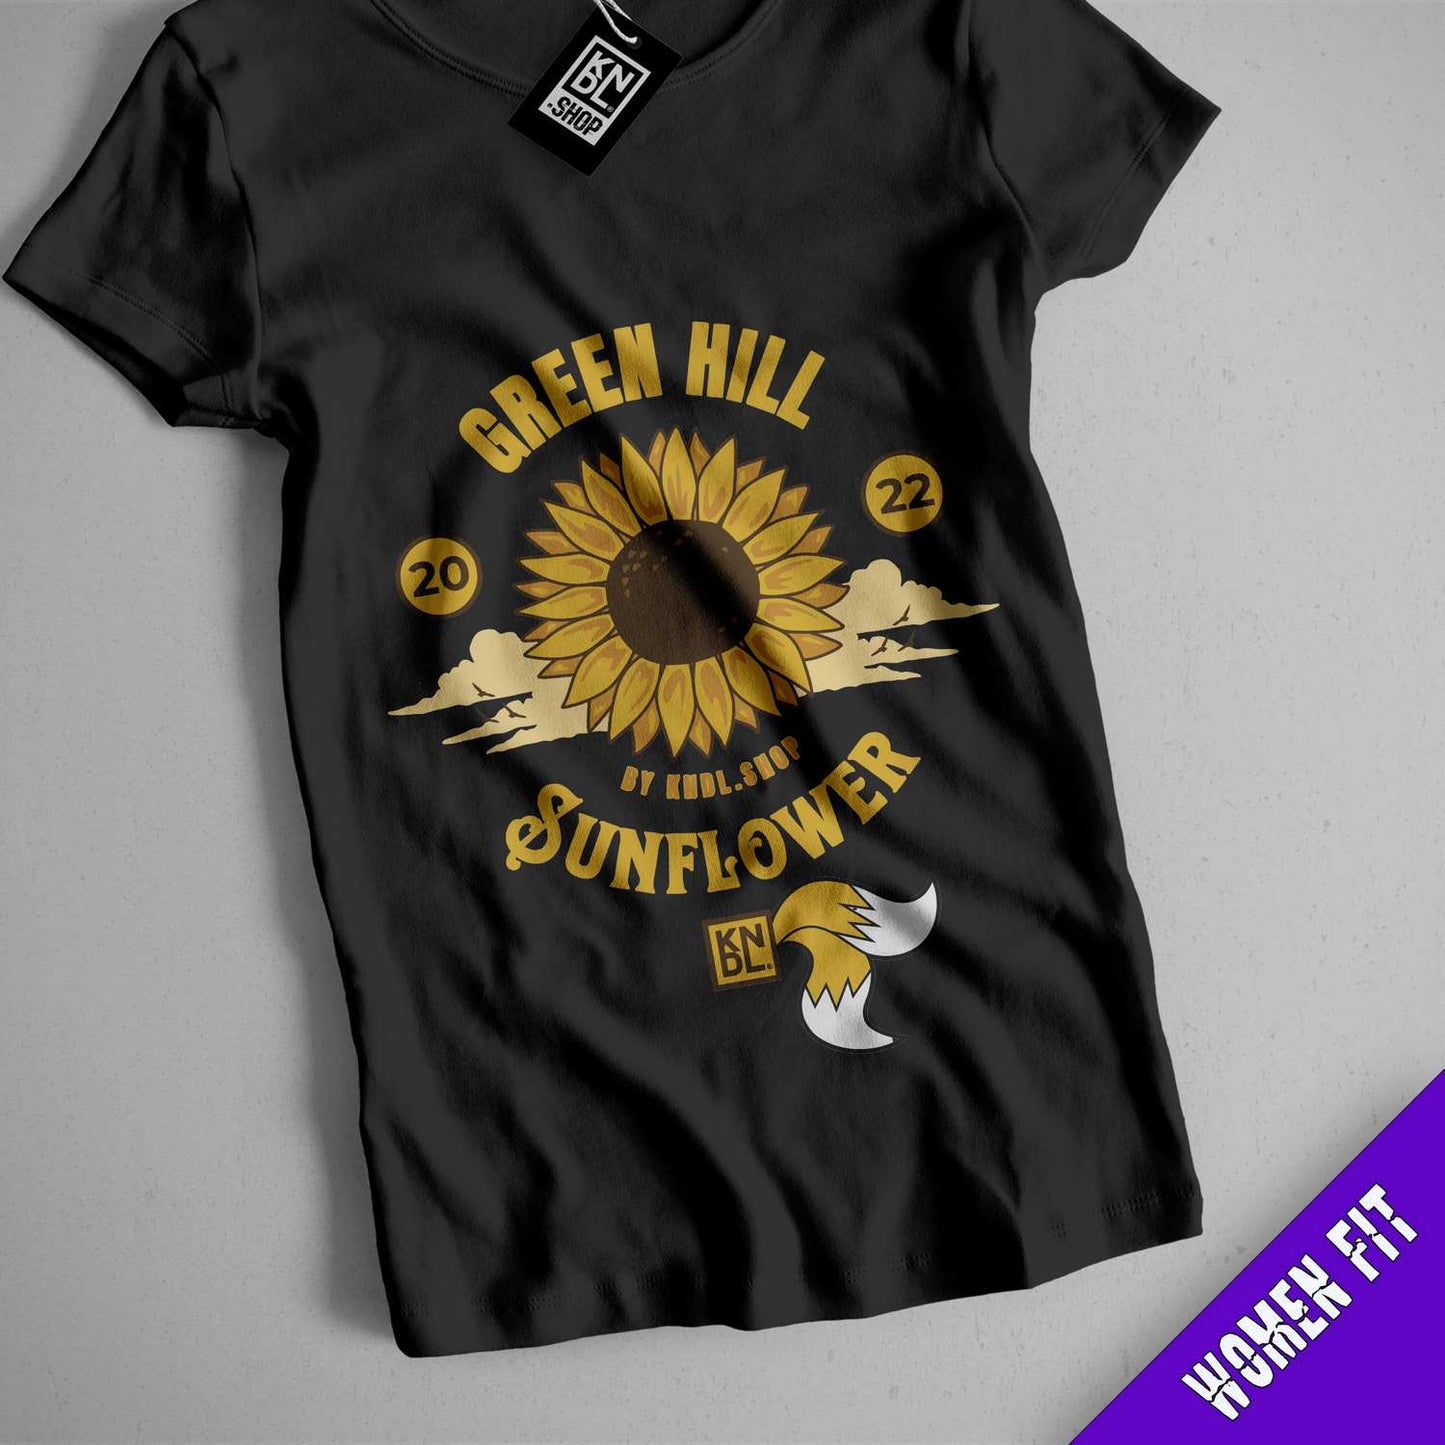 a black shirt with a sunflower on it